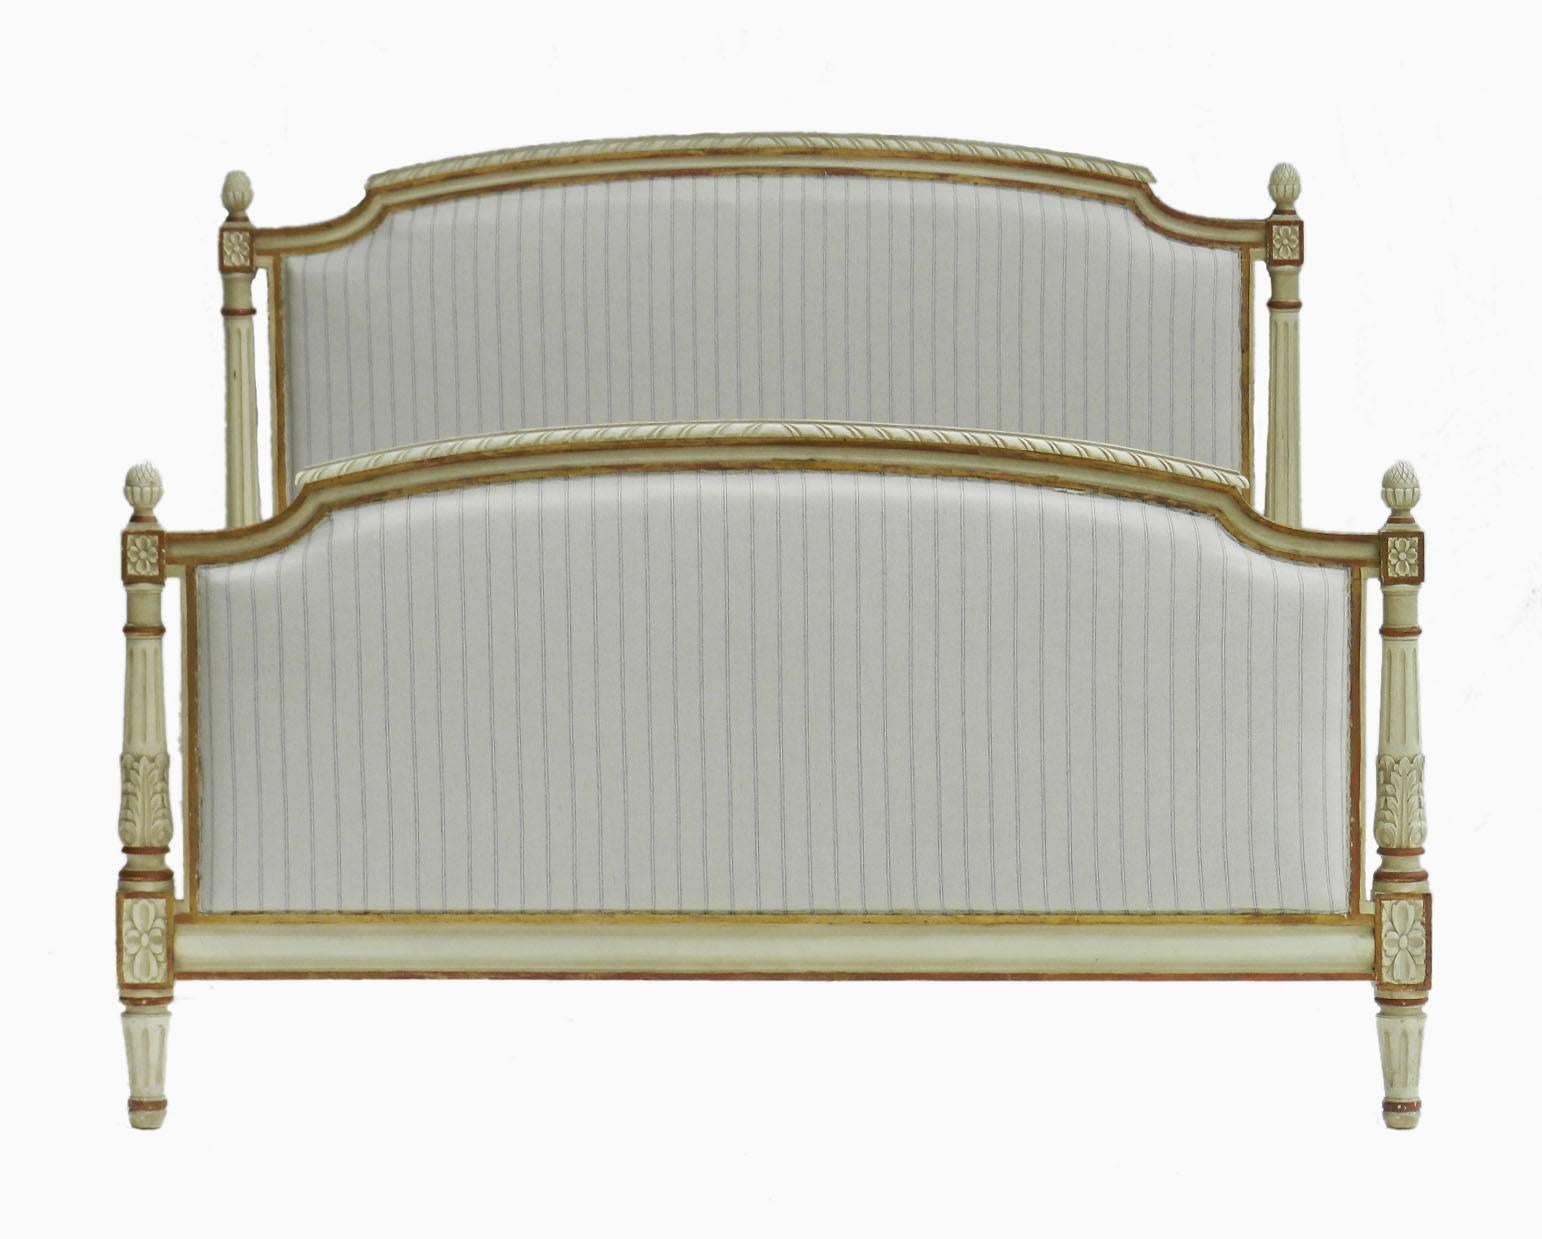 French bed and base early 20th century Louis XVI with original paint, circa 1910
US Queen  UK King size
Newly upholstered in cotton linen with piping
An ideal bed for a modern interior as well as a traditional one having a low line head and foot